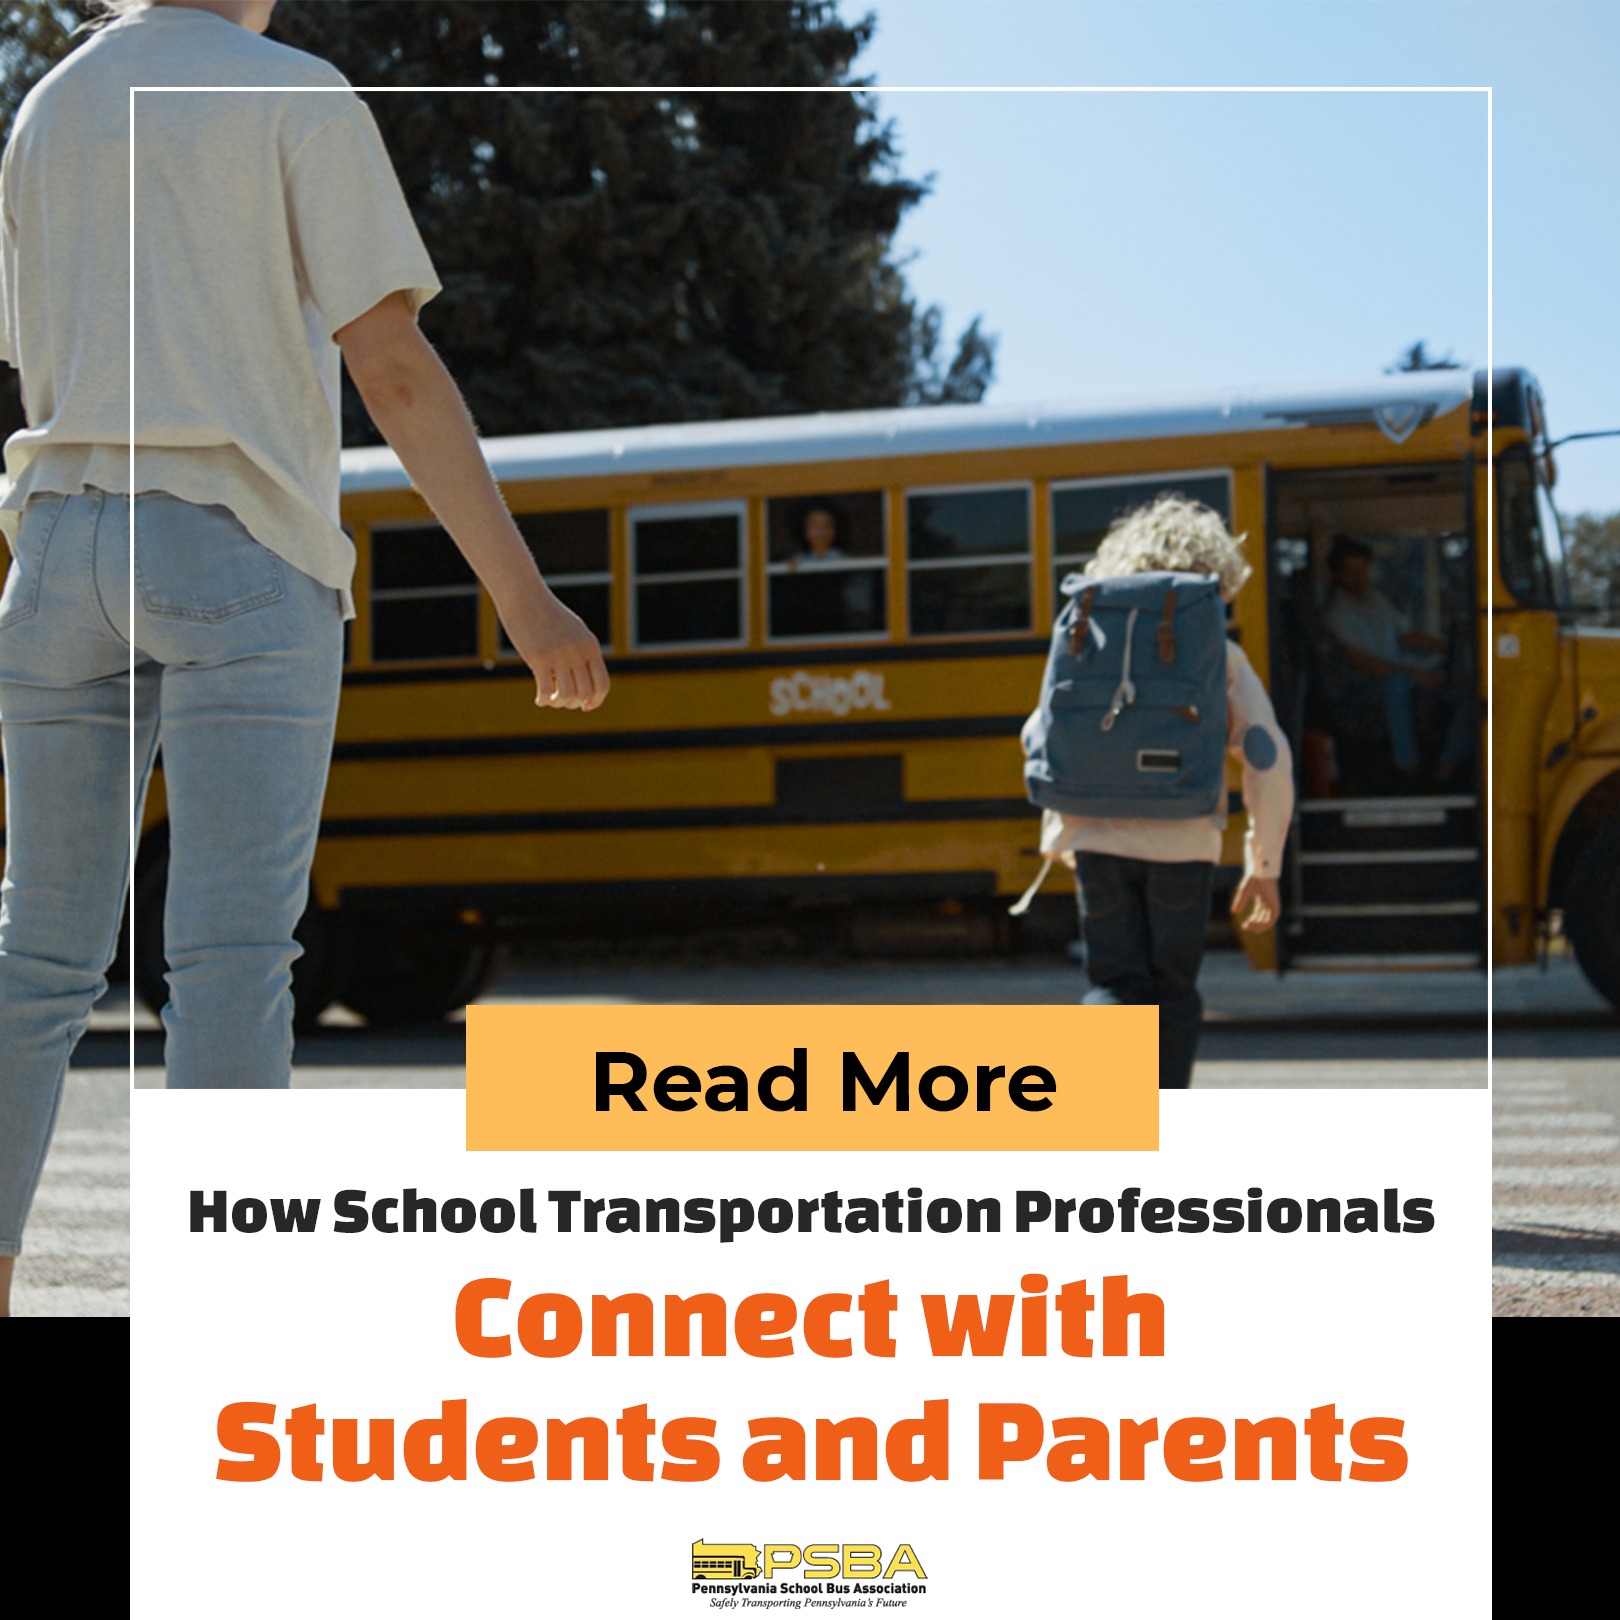 How School Transportation Professionals Connect with Students and Parents